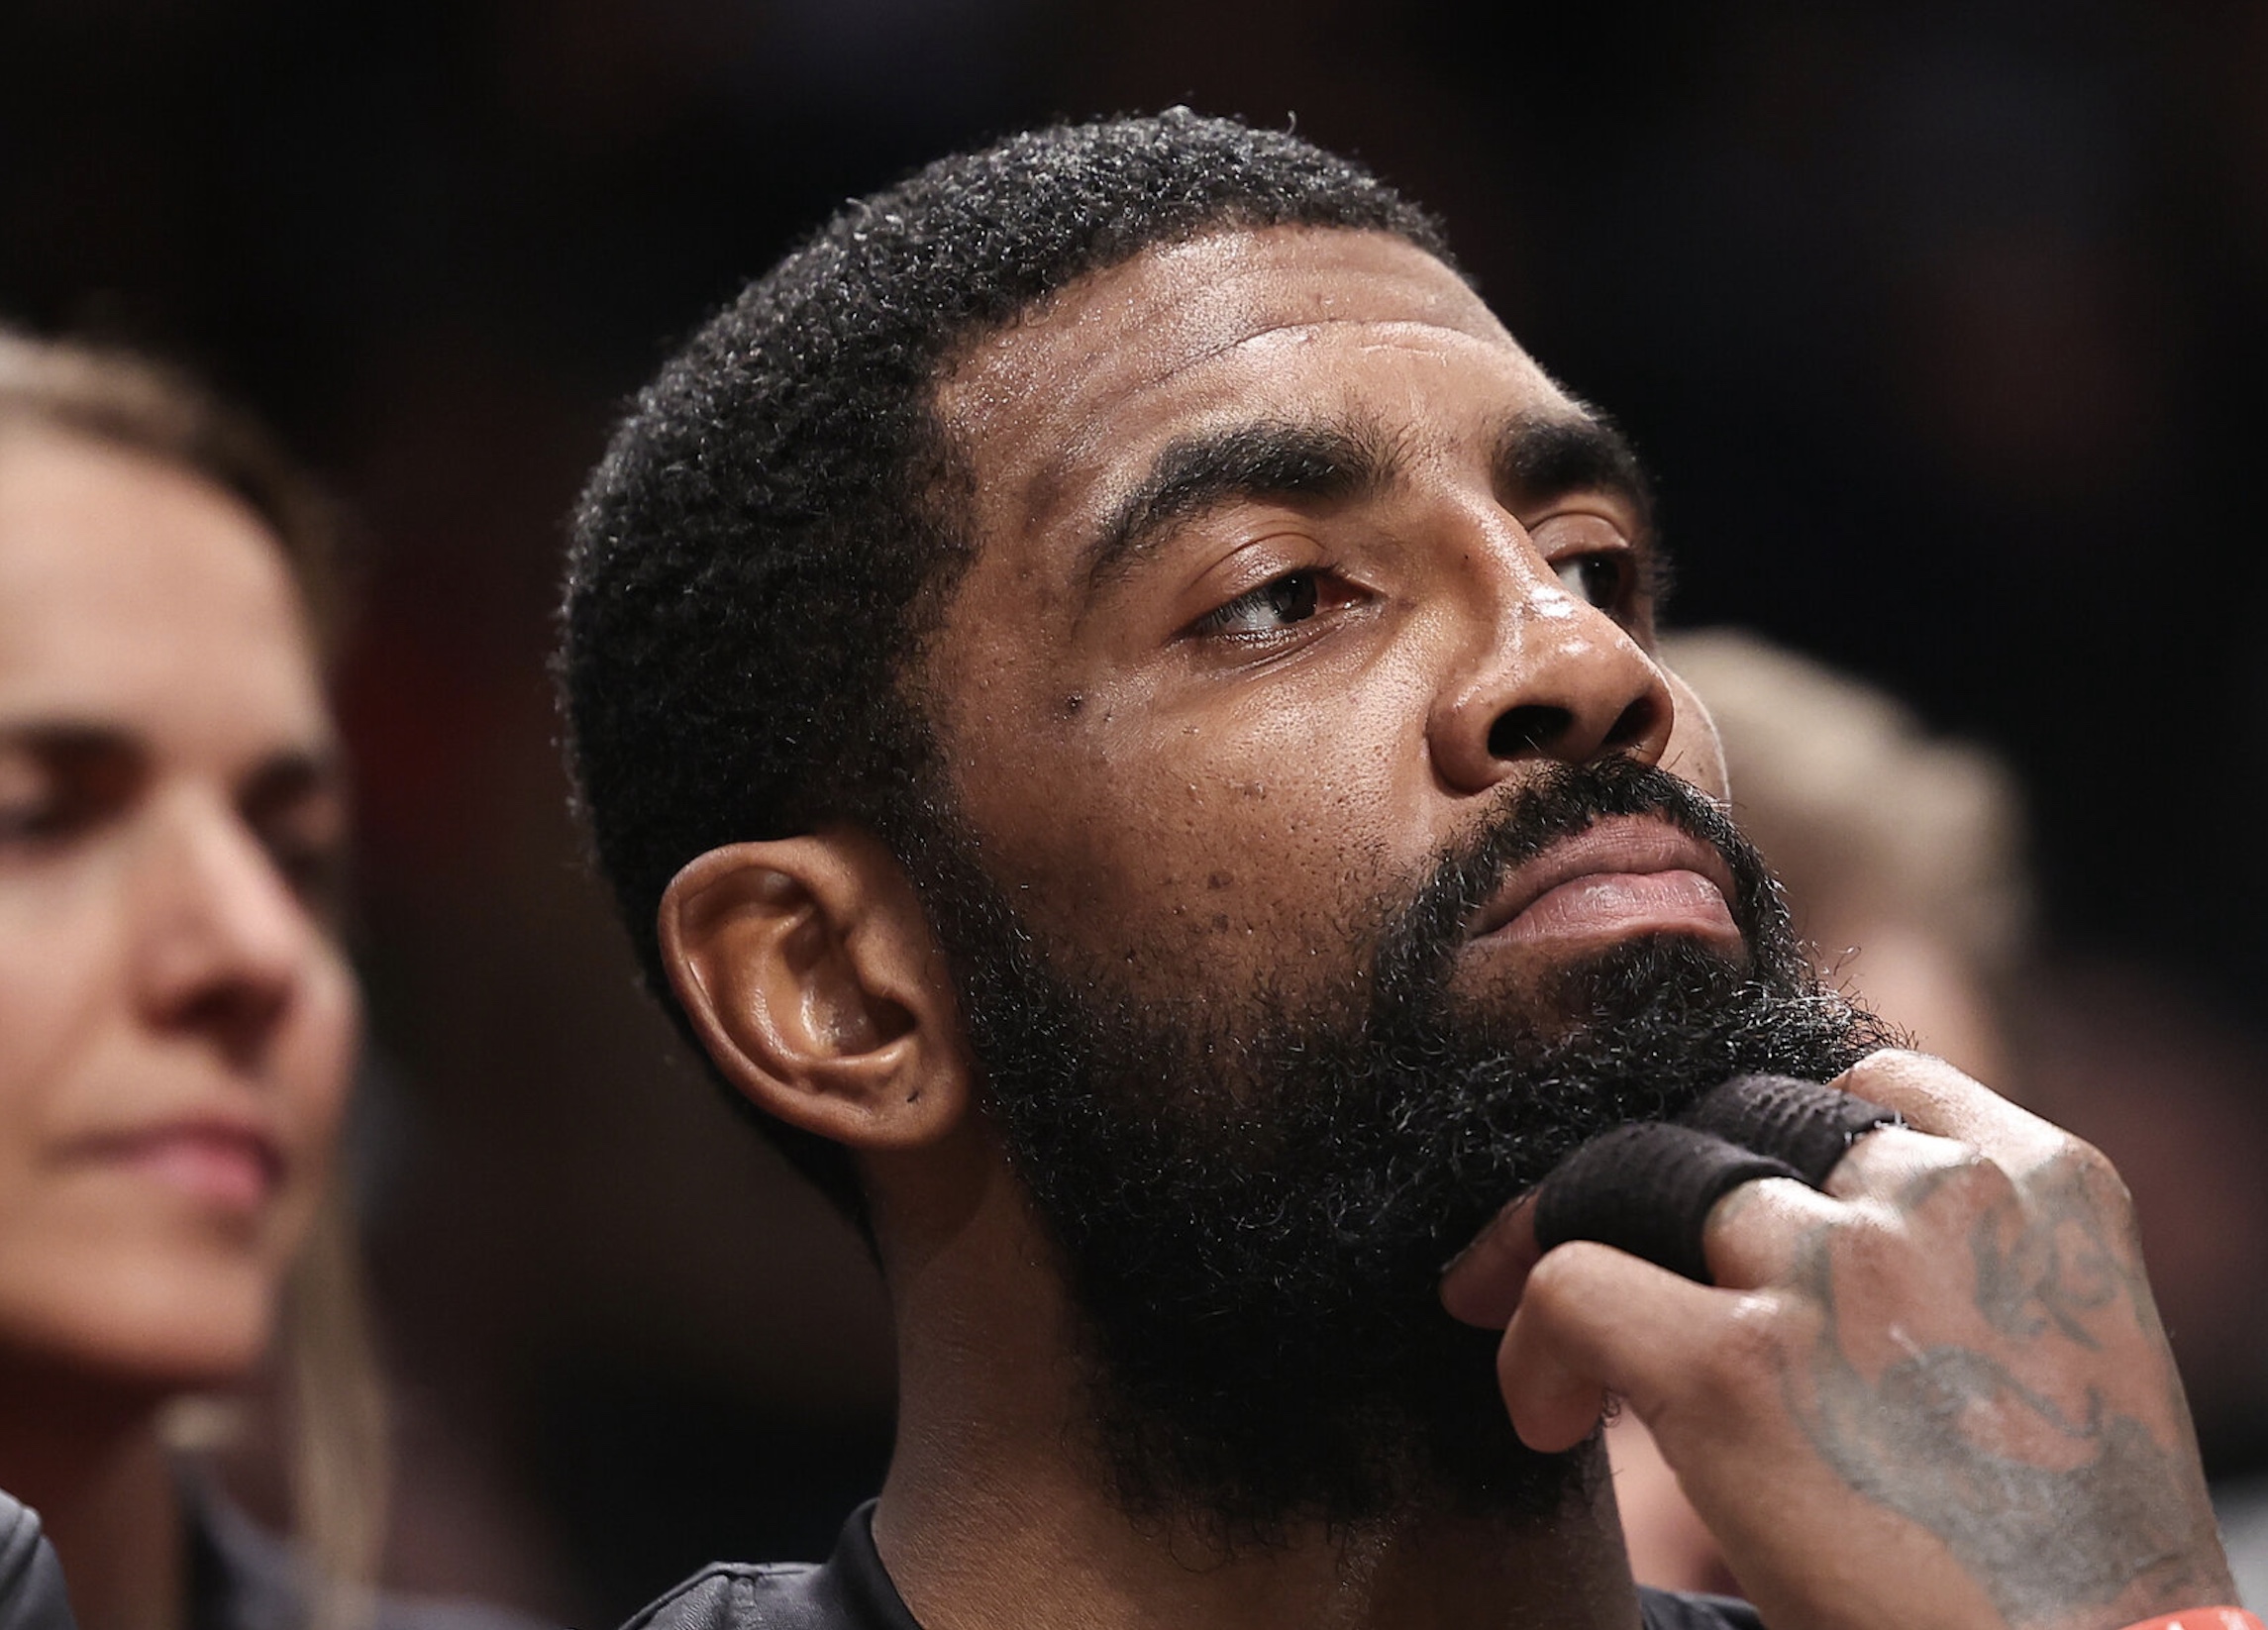 Amazon Won’t Take Down Movie That Kyrie Irving Got Suspended For Promoting